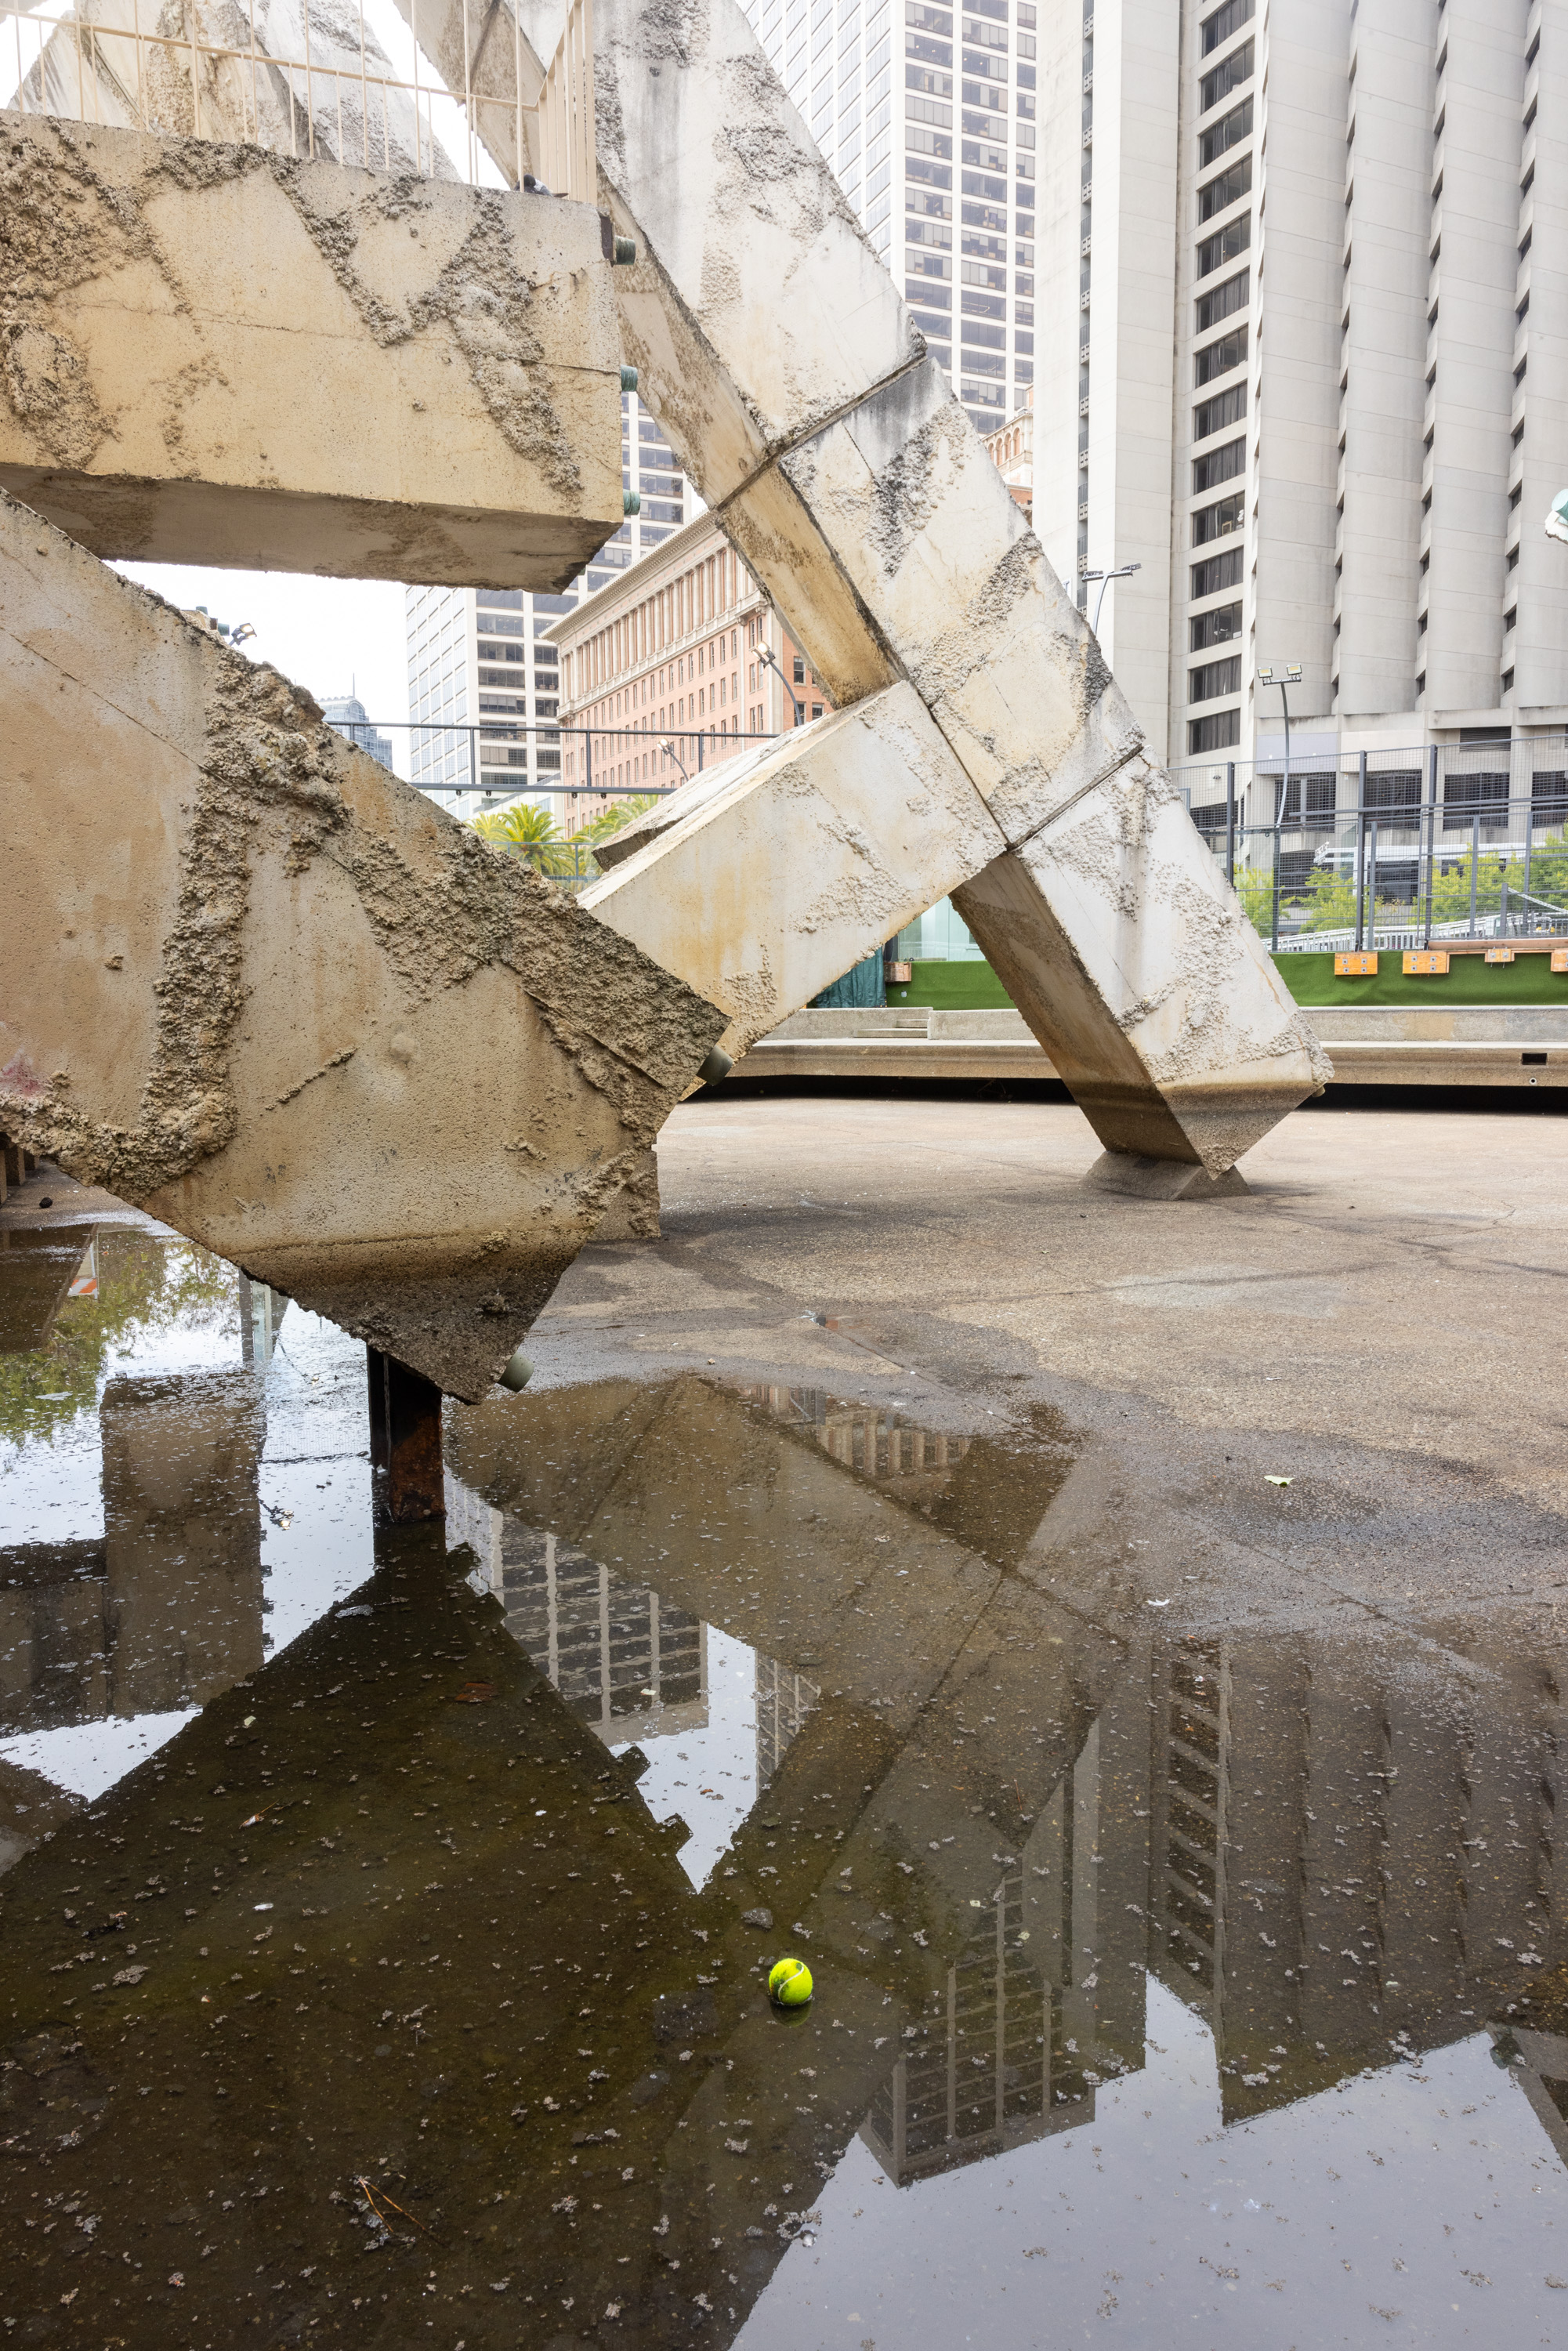 The image shows a large concrete sculpture with rough textures, surrounded by tall buildings. A puddle reflects the sculpture and buildings, with a small green tennis ball in it.